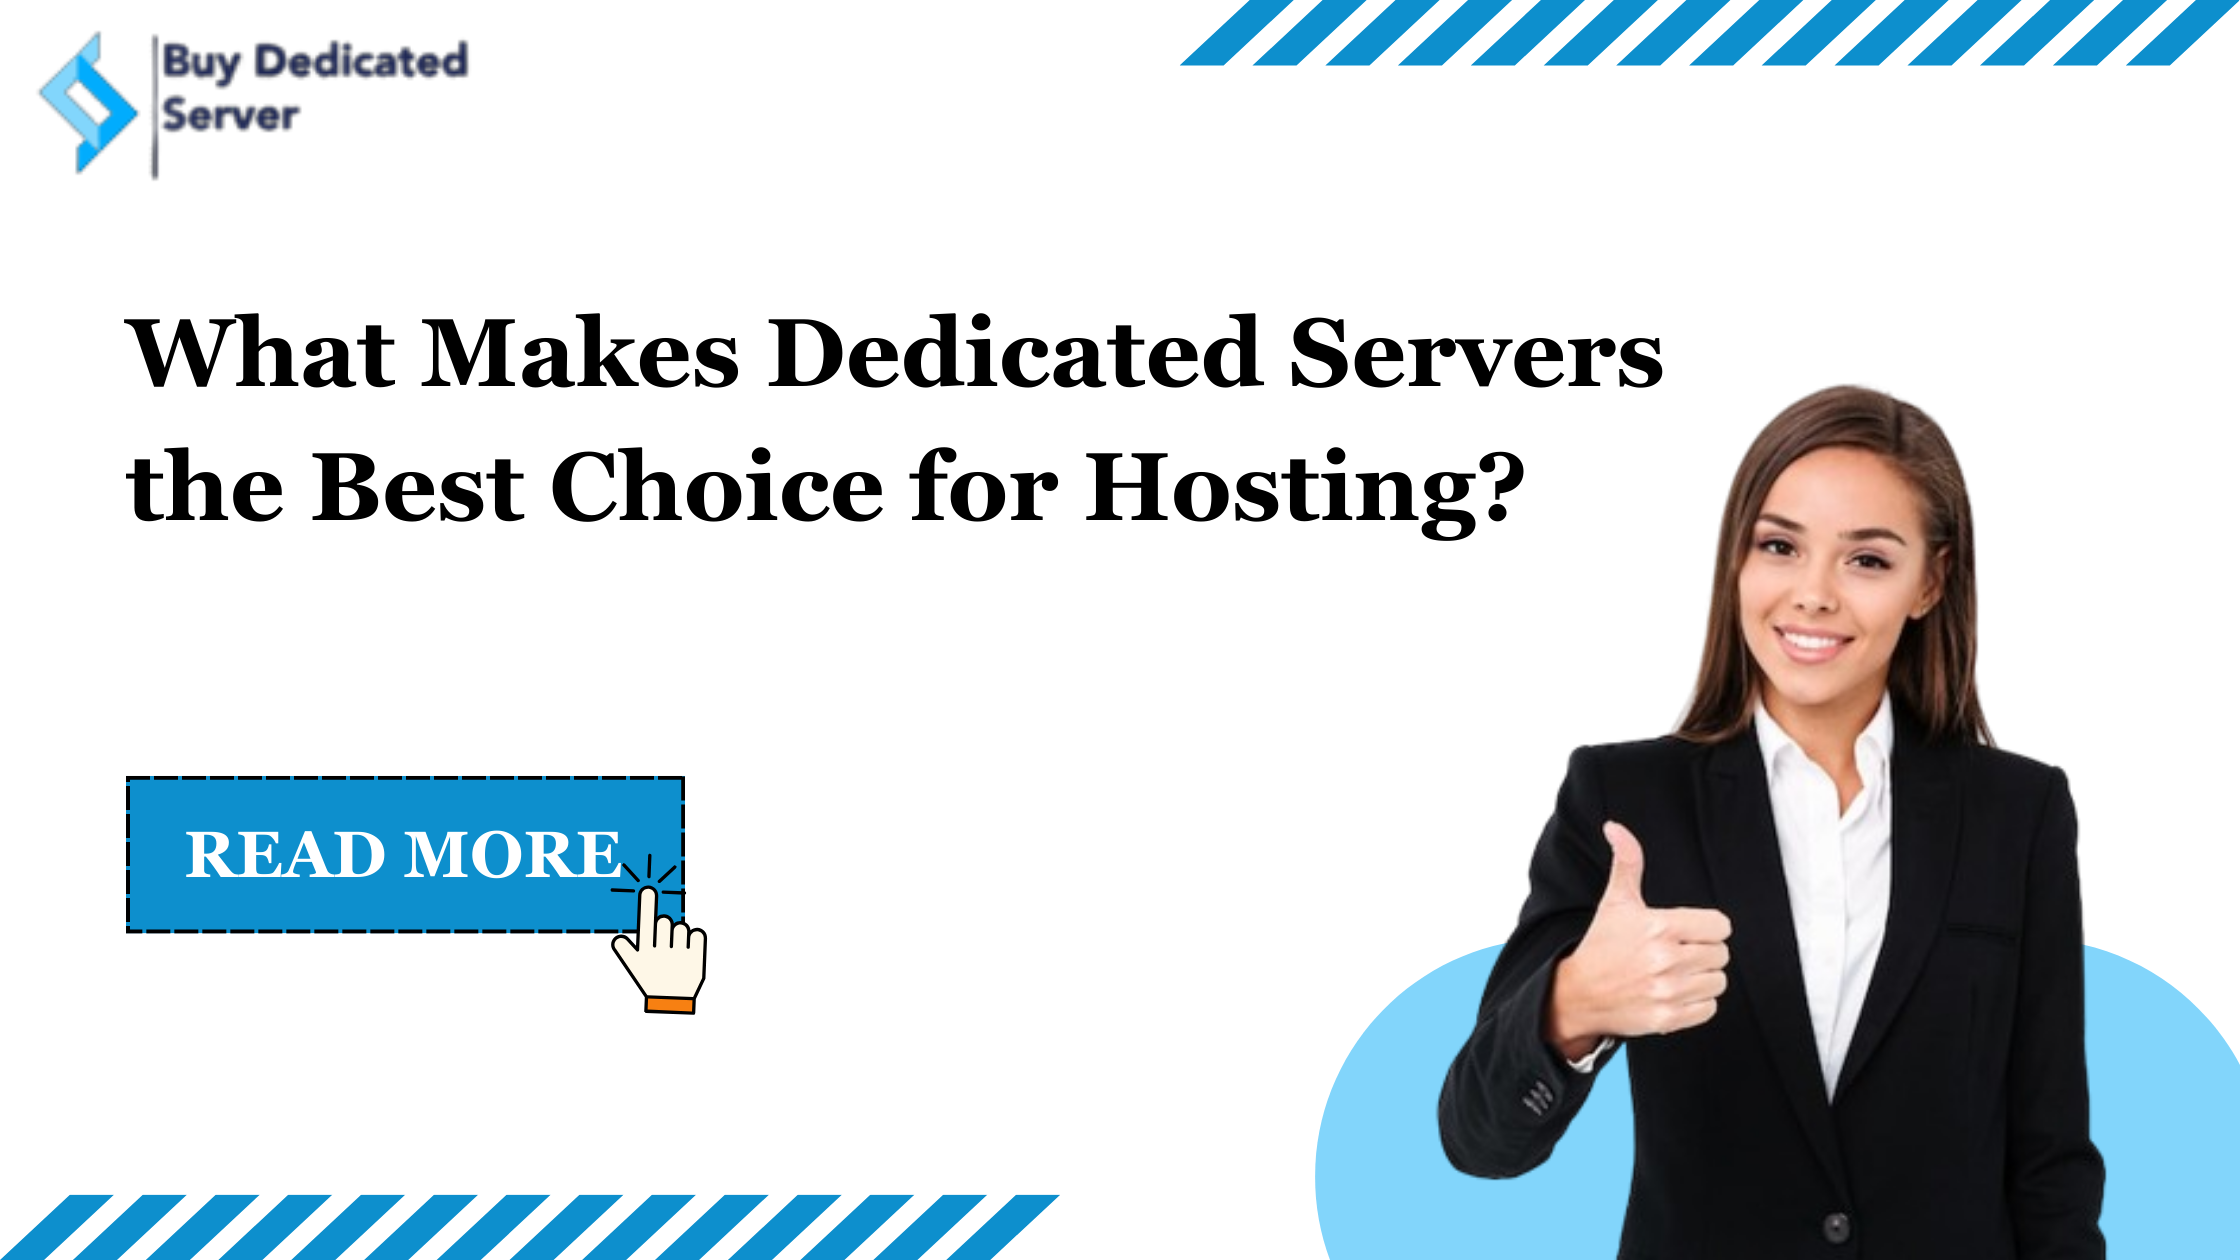 What Makes Dedicated Servers the Best Choice for Hosting?